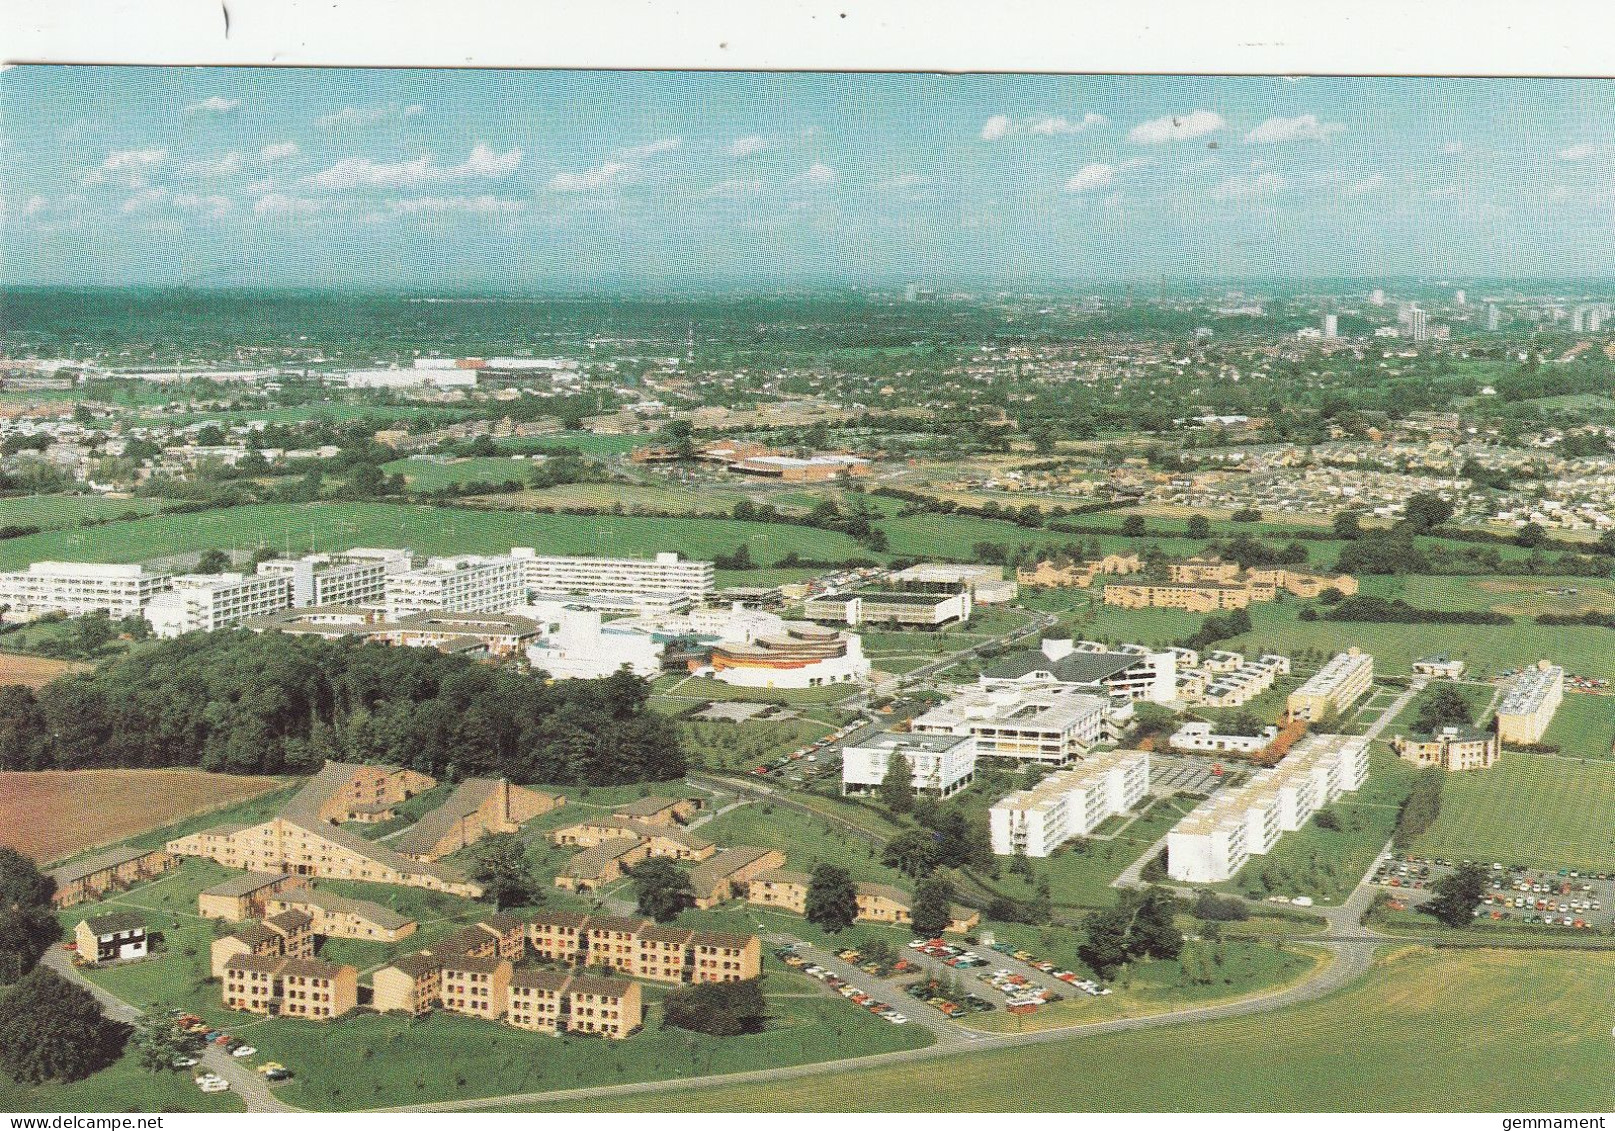 UNIVERSITY OF WARWICK - CENTRAL CAMPUS. AERIAL VIEW - Warwick